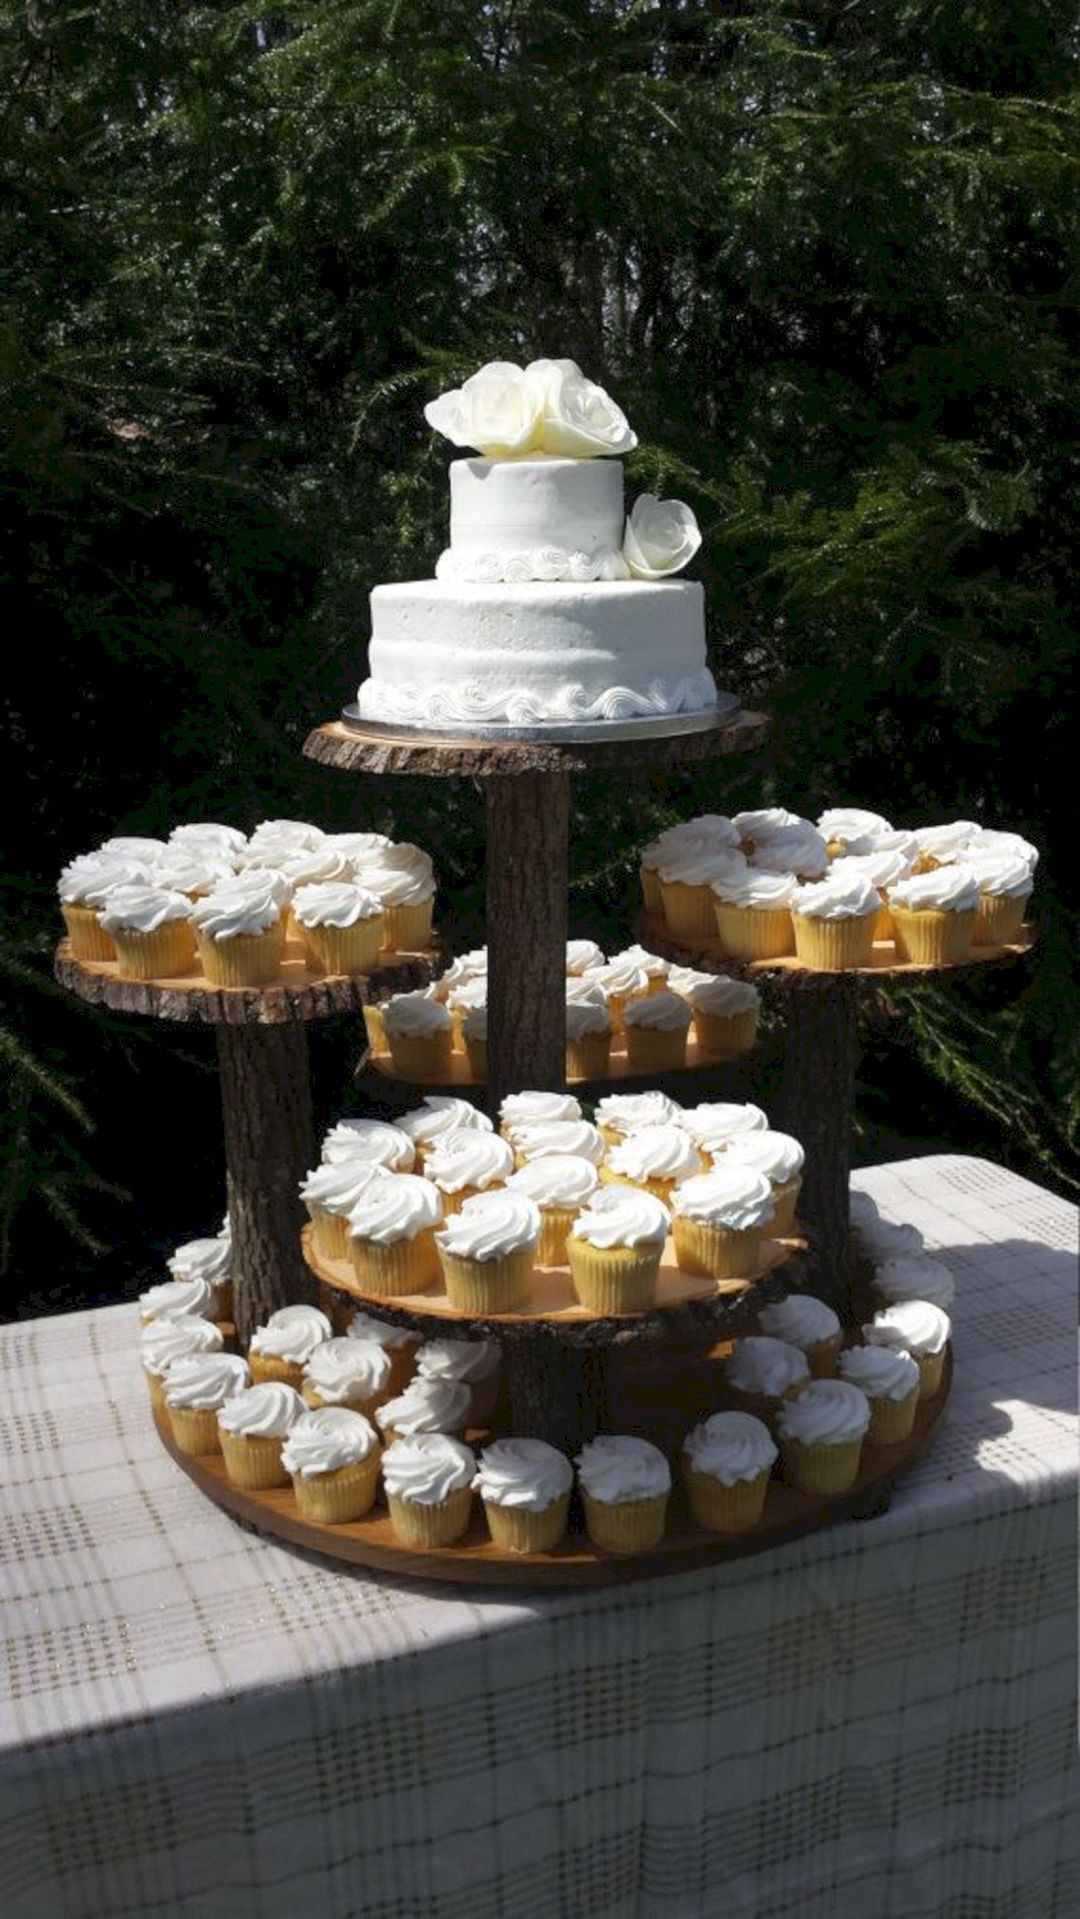 Wedding Cake And Cupcakes Stand
 Rustic Wedding Cake Cupcake Stand Design – OOSILE